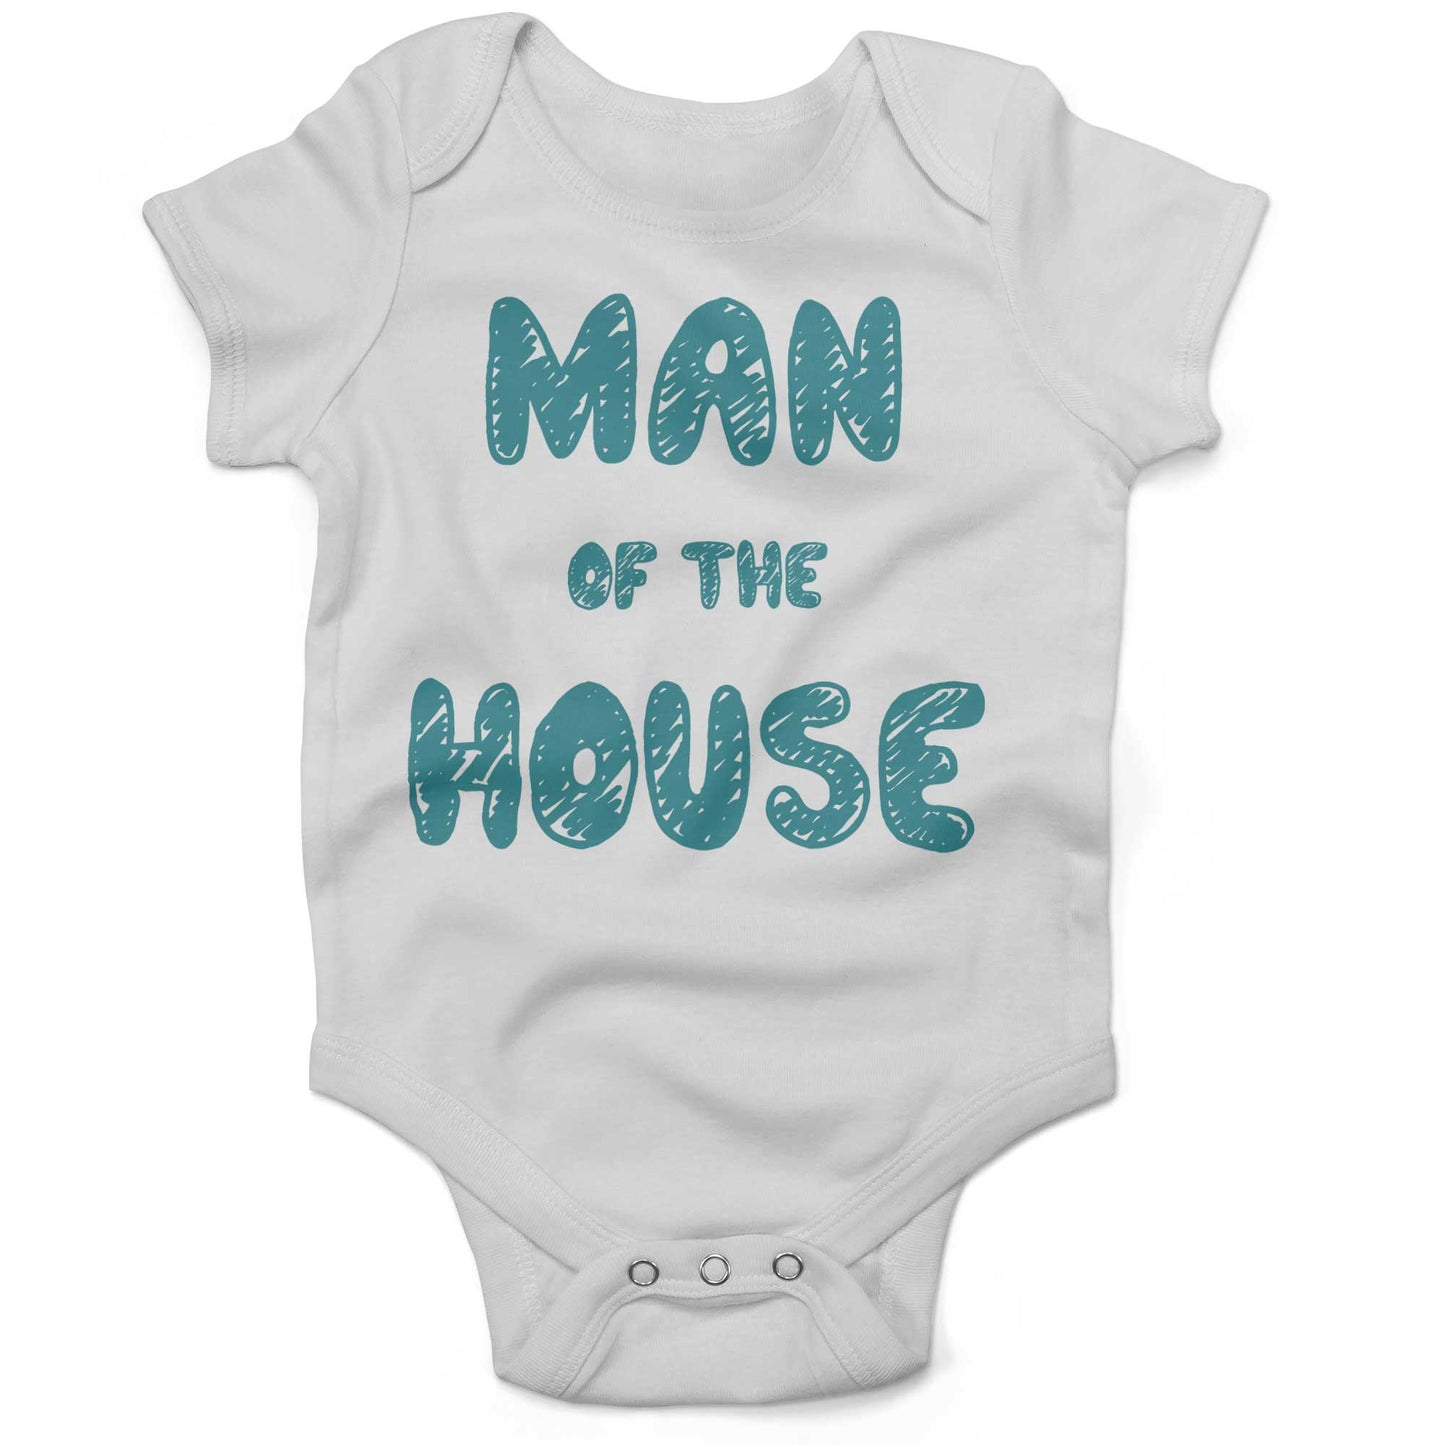 Man Of The House Infant Bodysuit or Raglan Baby Tee-White-3-6 months